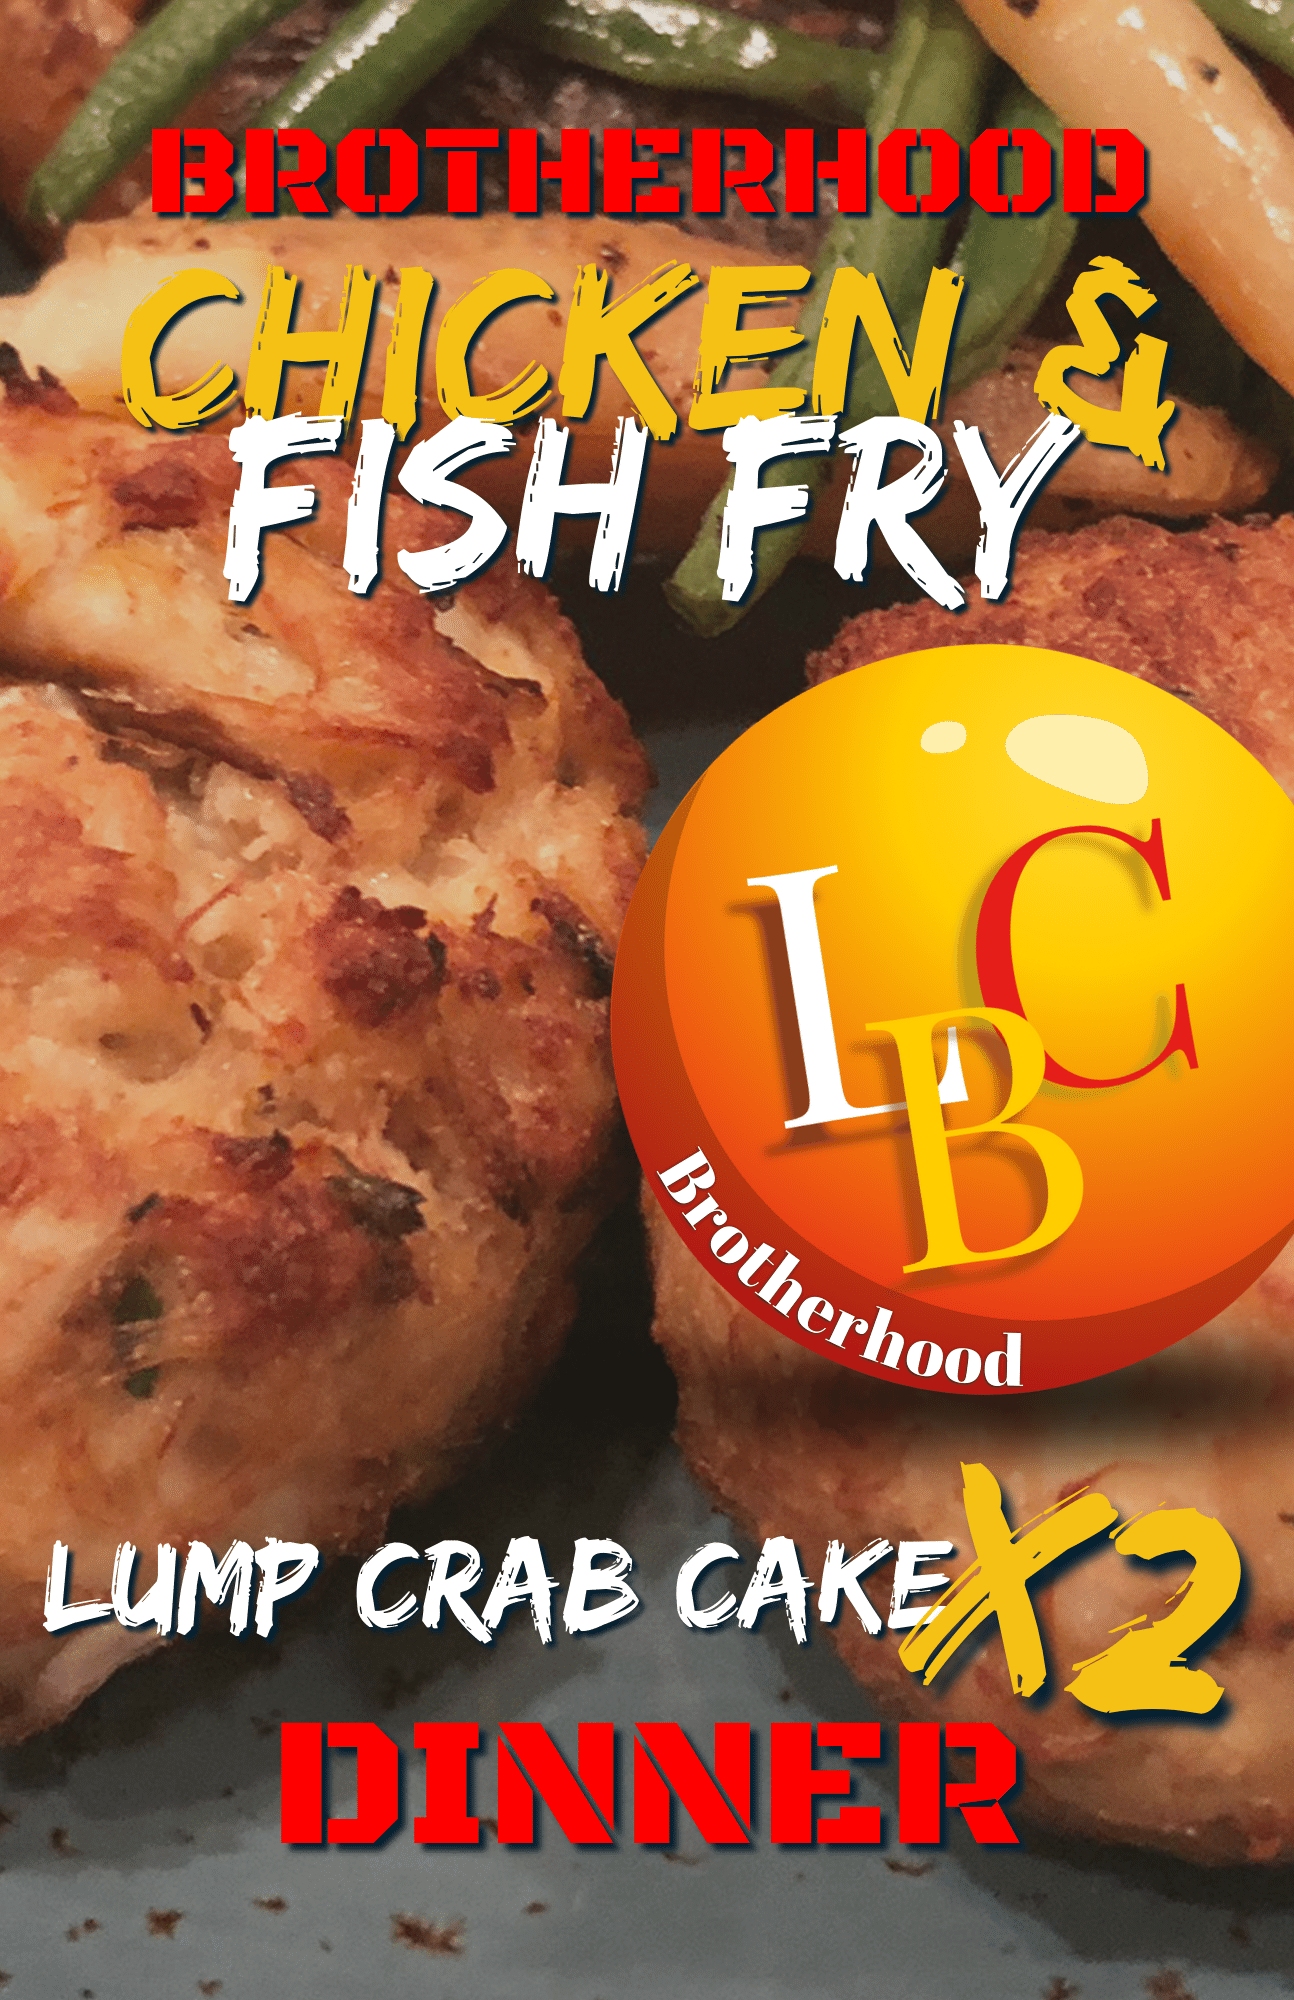 FishFry_CrabCakex2_Product Image.png